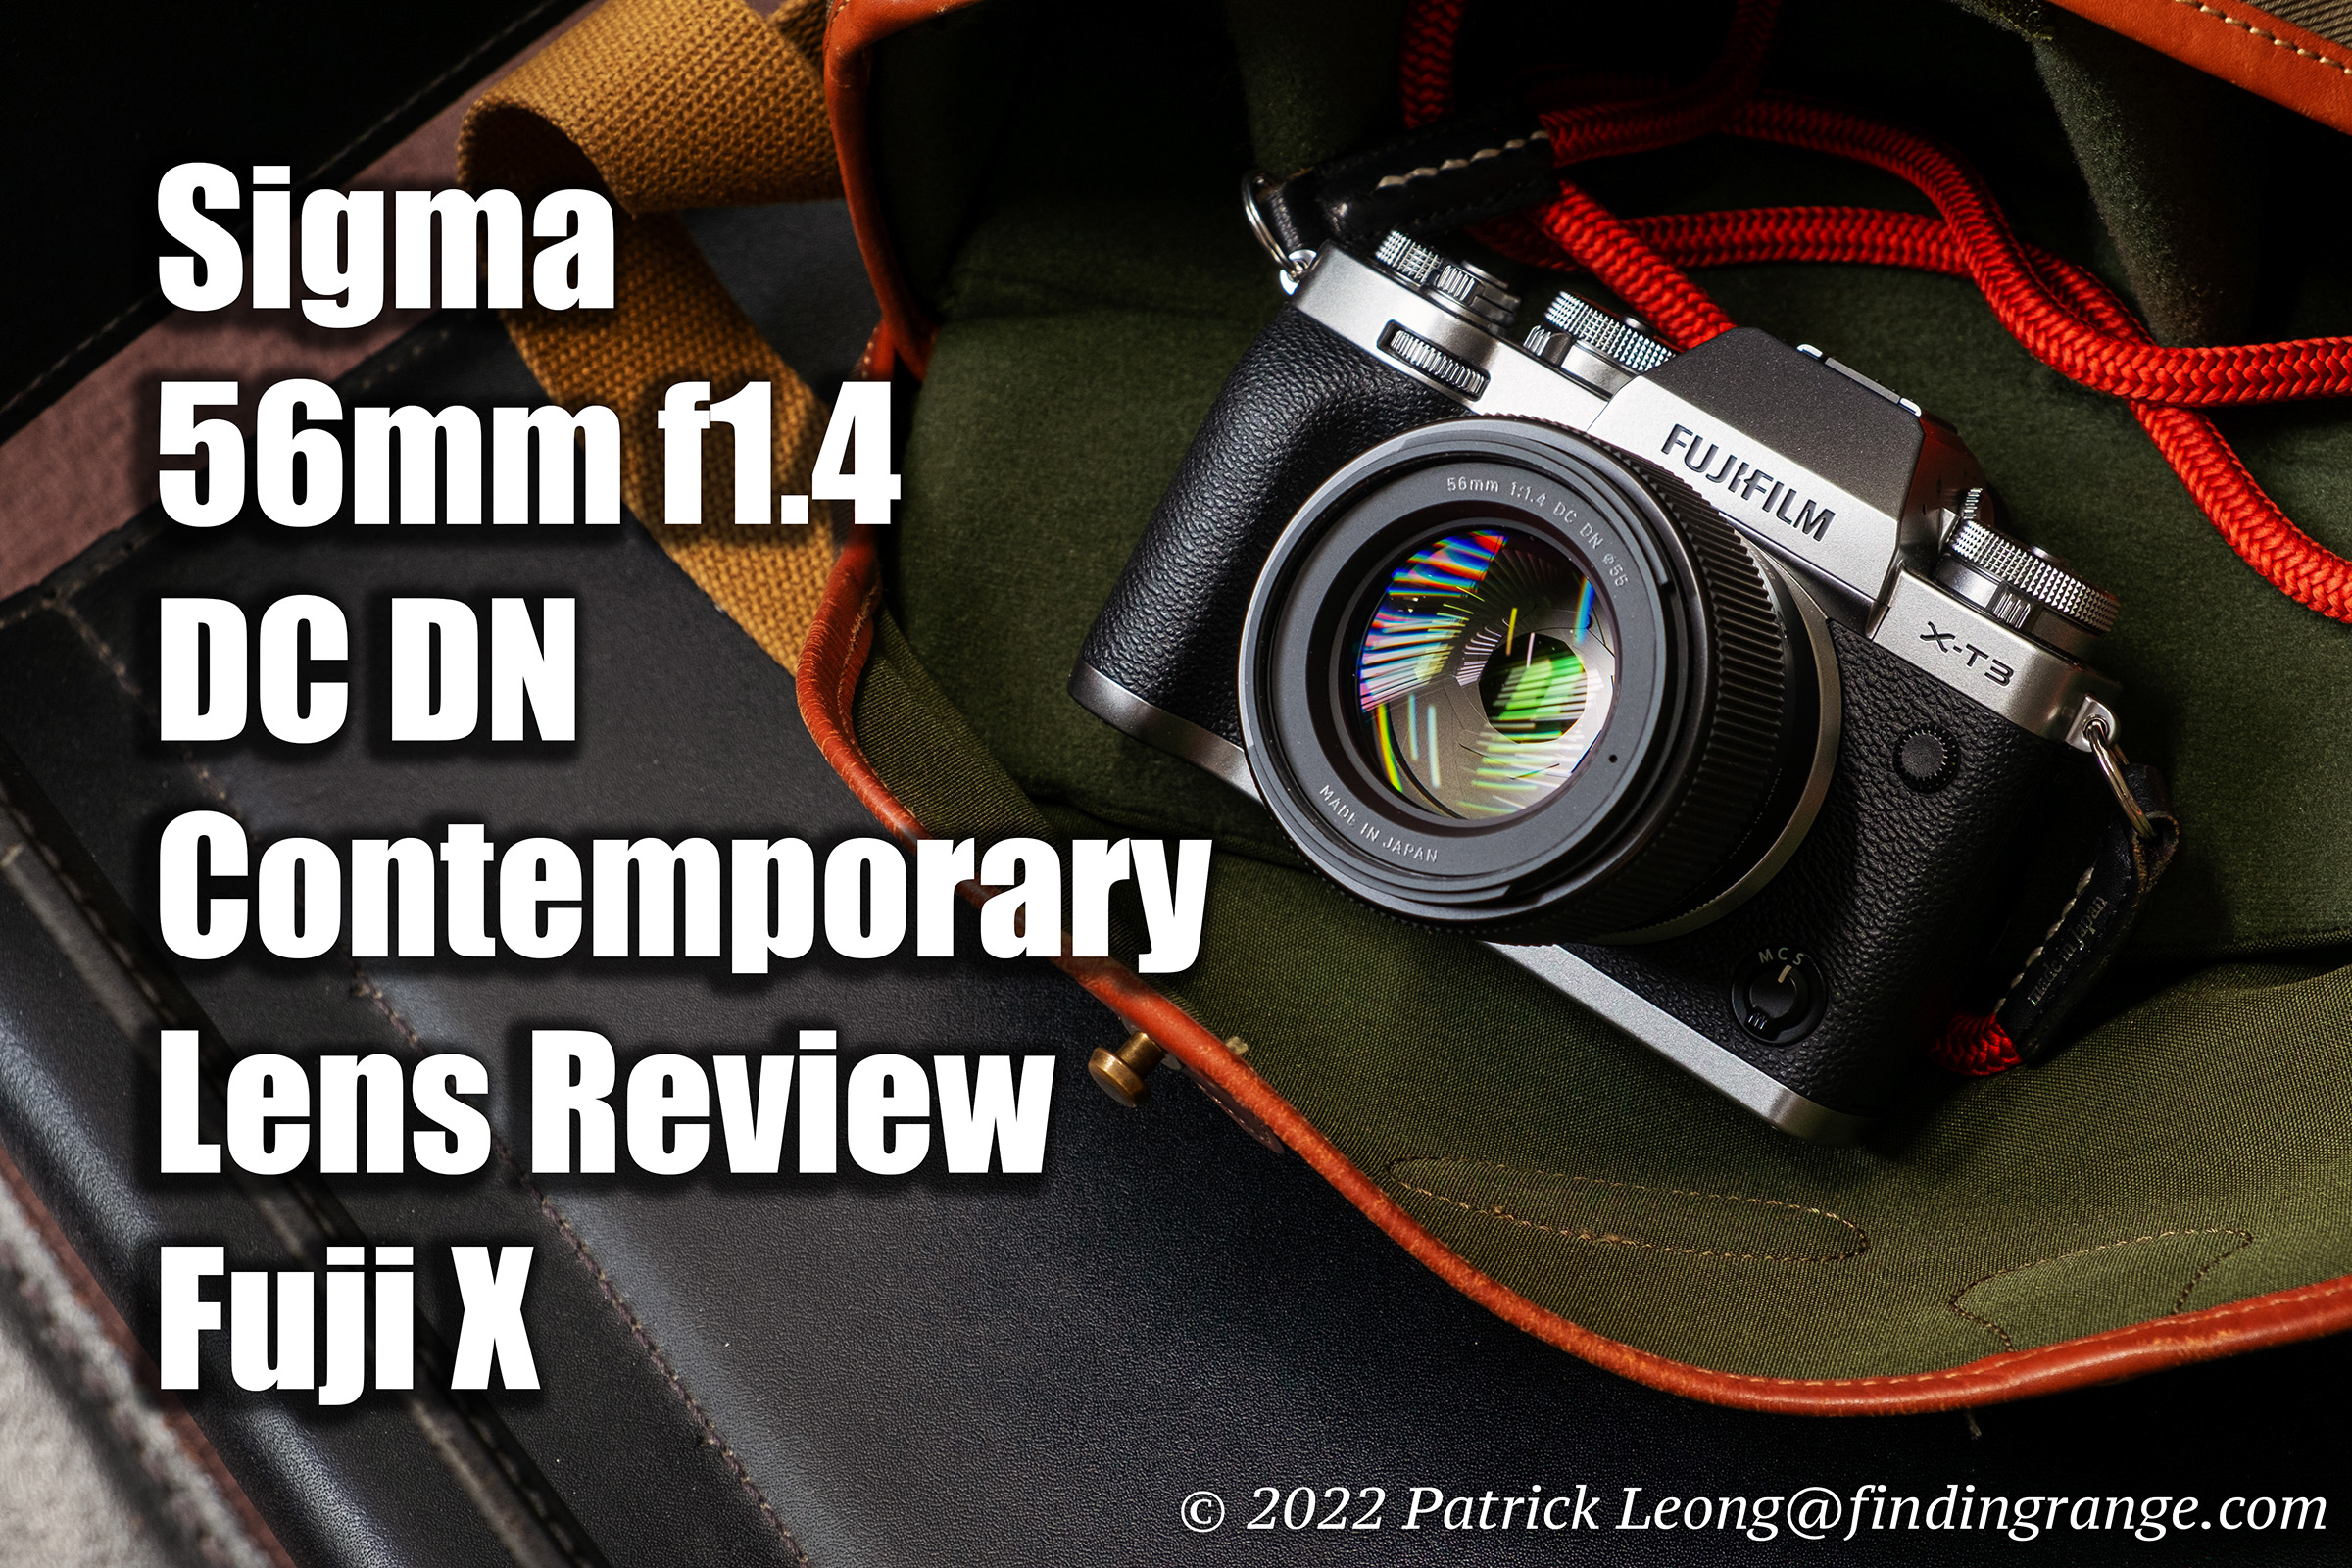 Sigma 56mm f1.4 DC DN Contemporary Review Fuji X - Finding Range